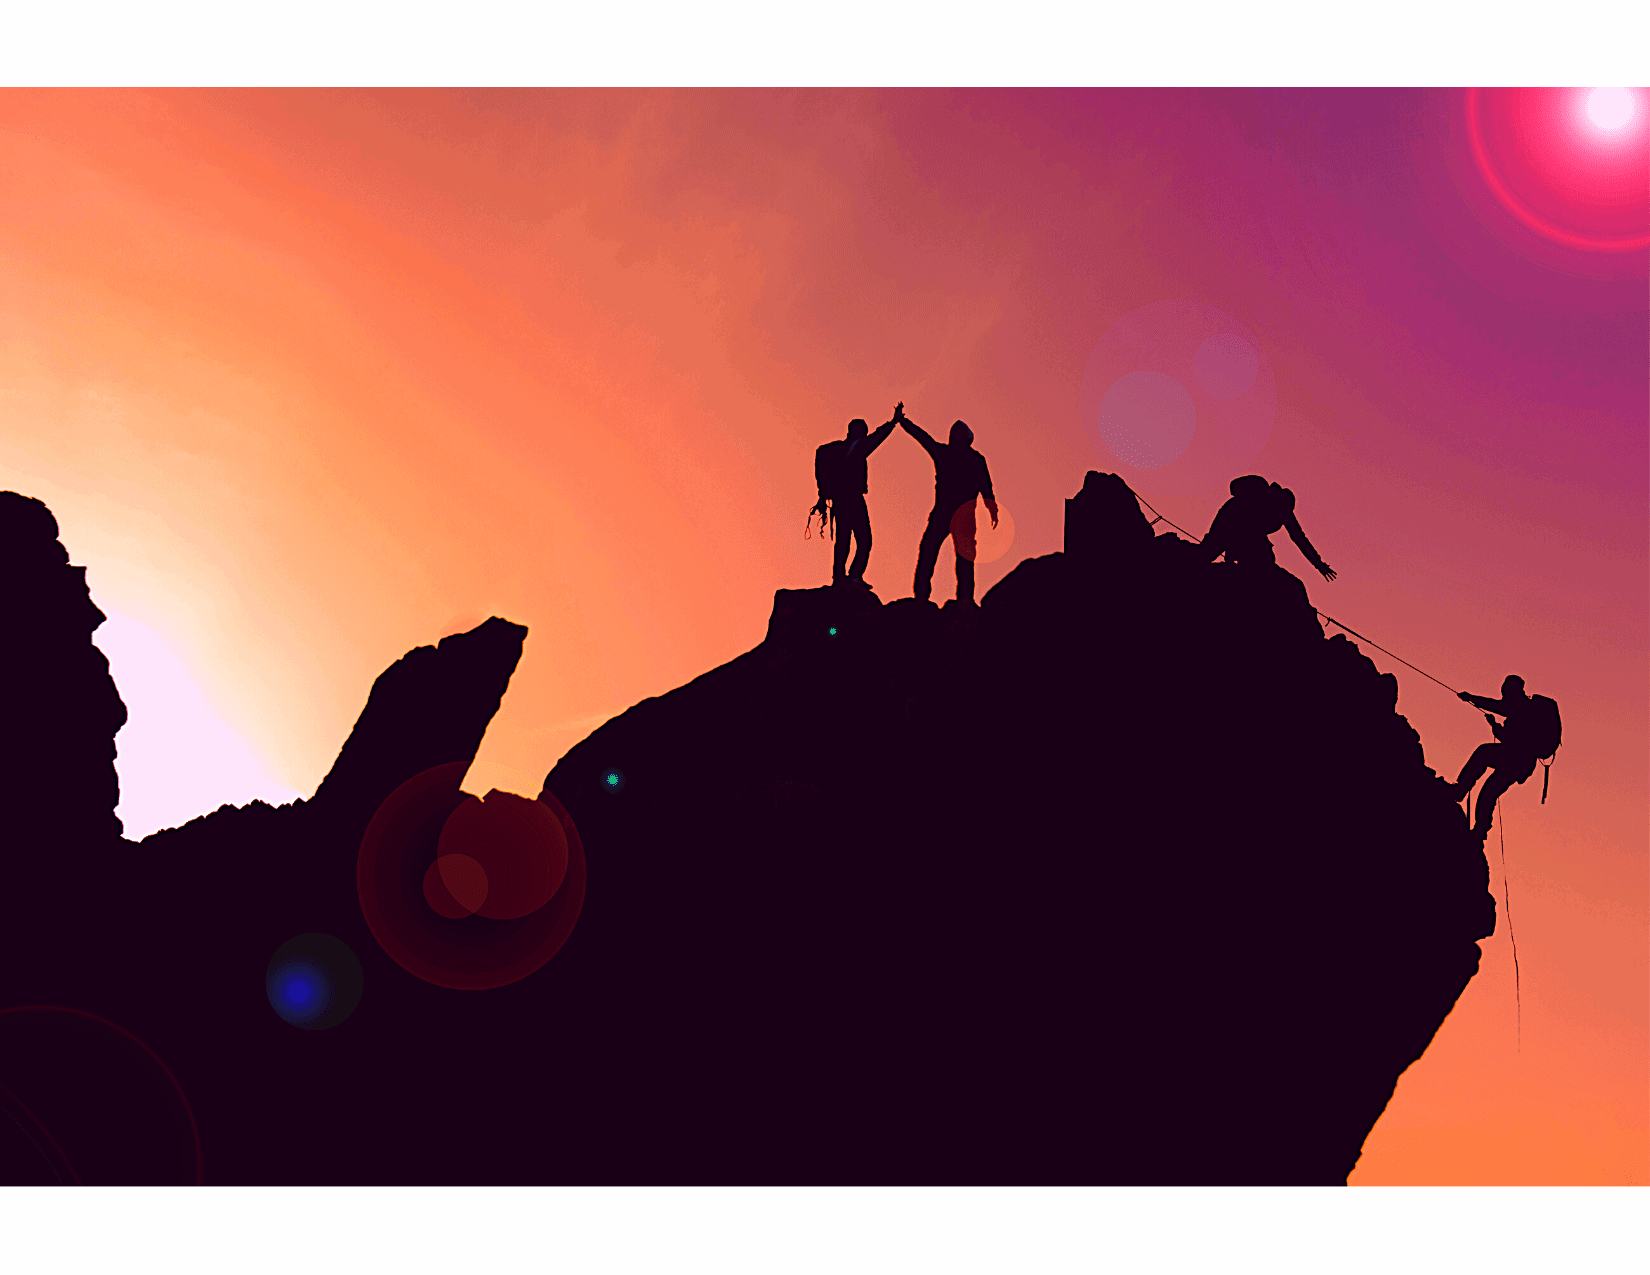 Three hikers in silhouette helping pull a fourth hiker up the side of a mountain, with a orange and pink sunset in the background.